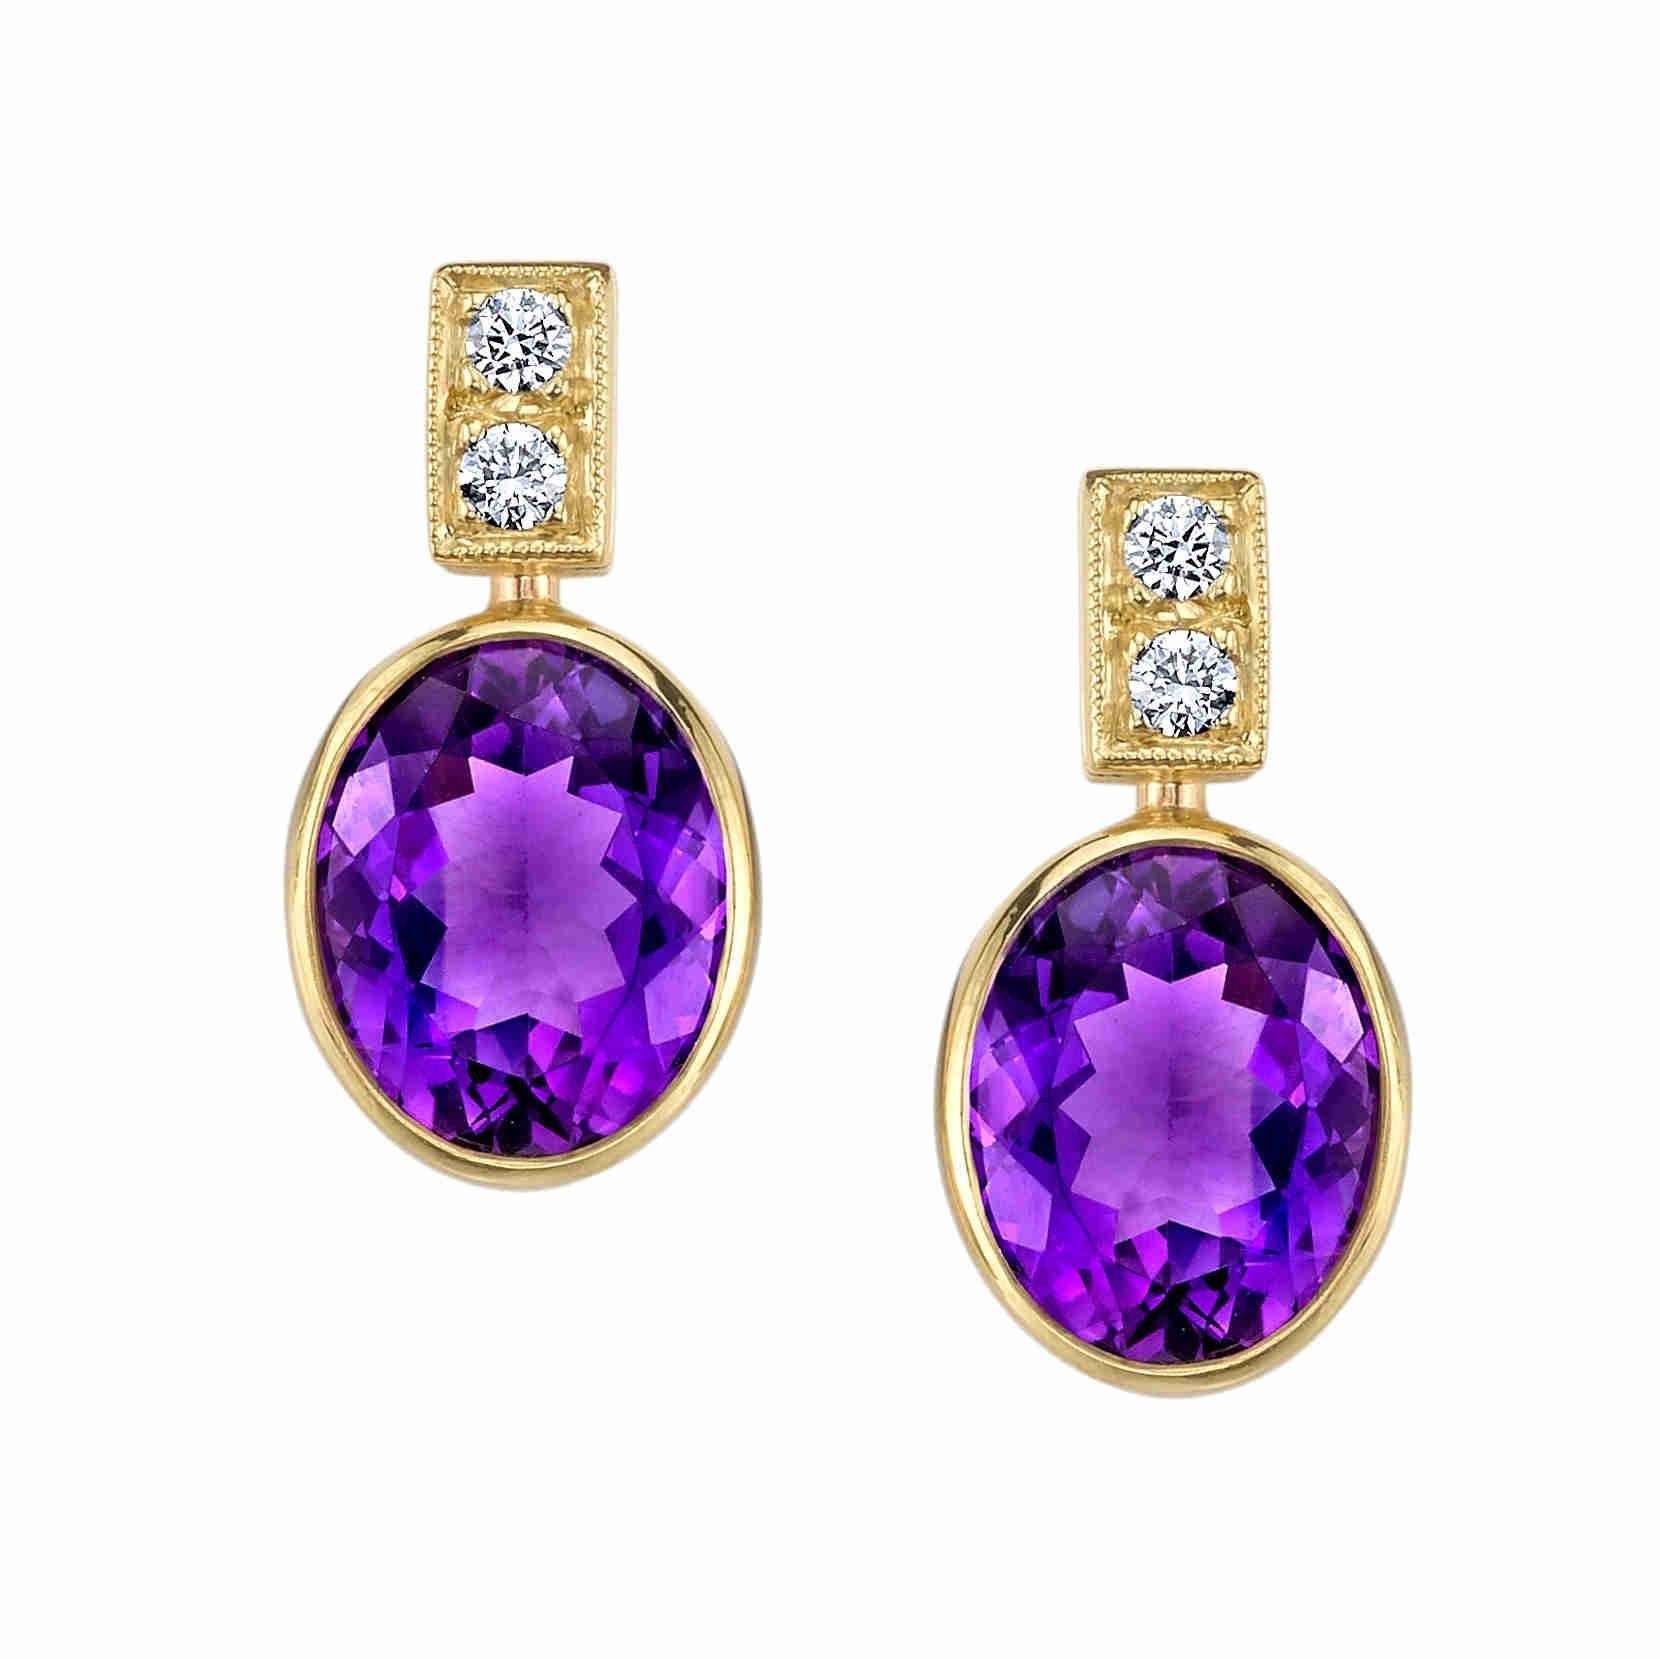 Amethyst and Diamond Drop Earrings in 18k Yellow Gold, 6.72 Carats Total